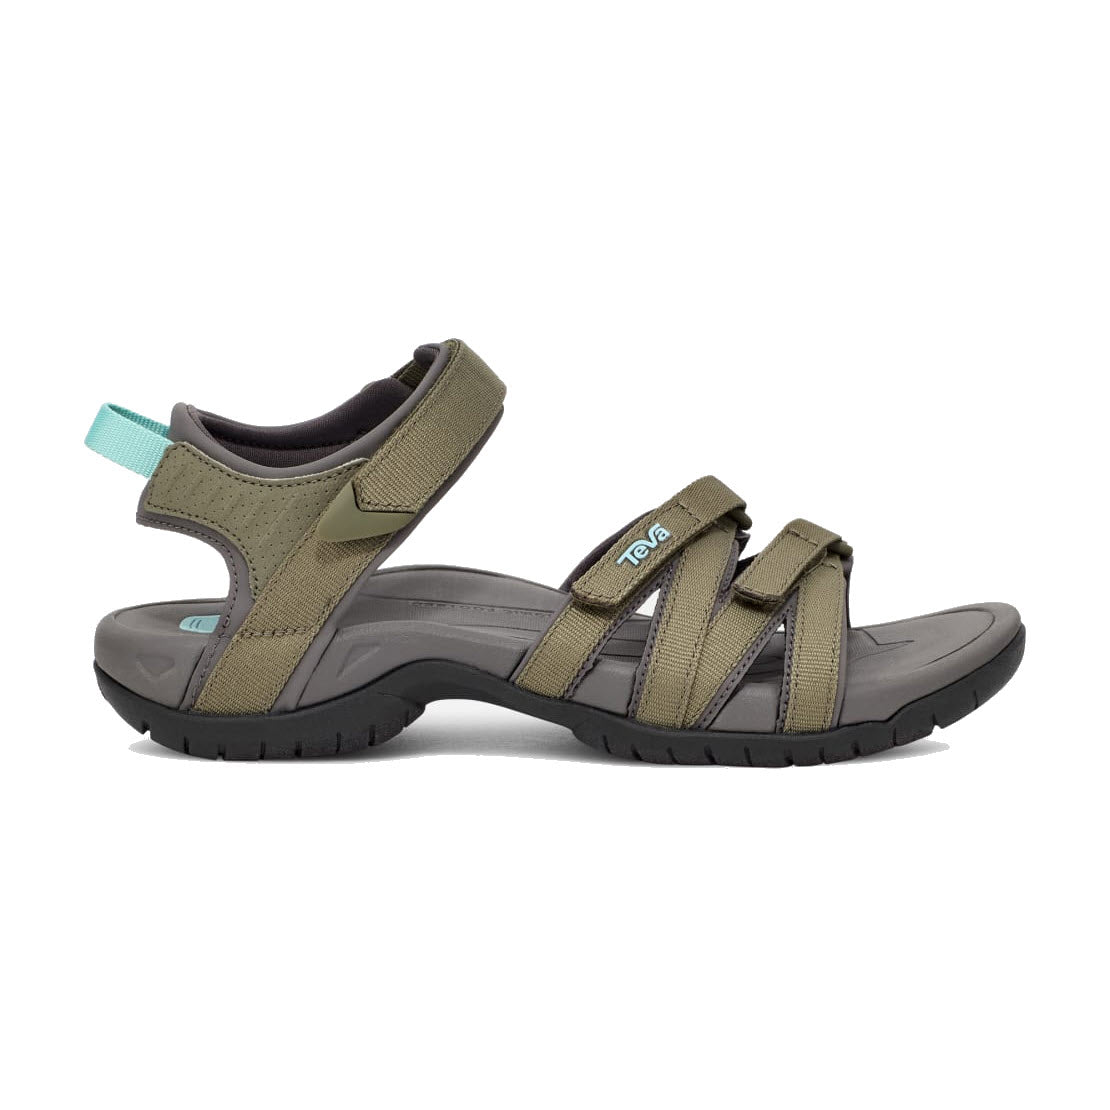 A pair of burnt olive women's Teva Tirra sandals with adjustable straps and a black sole, shown against a white background.